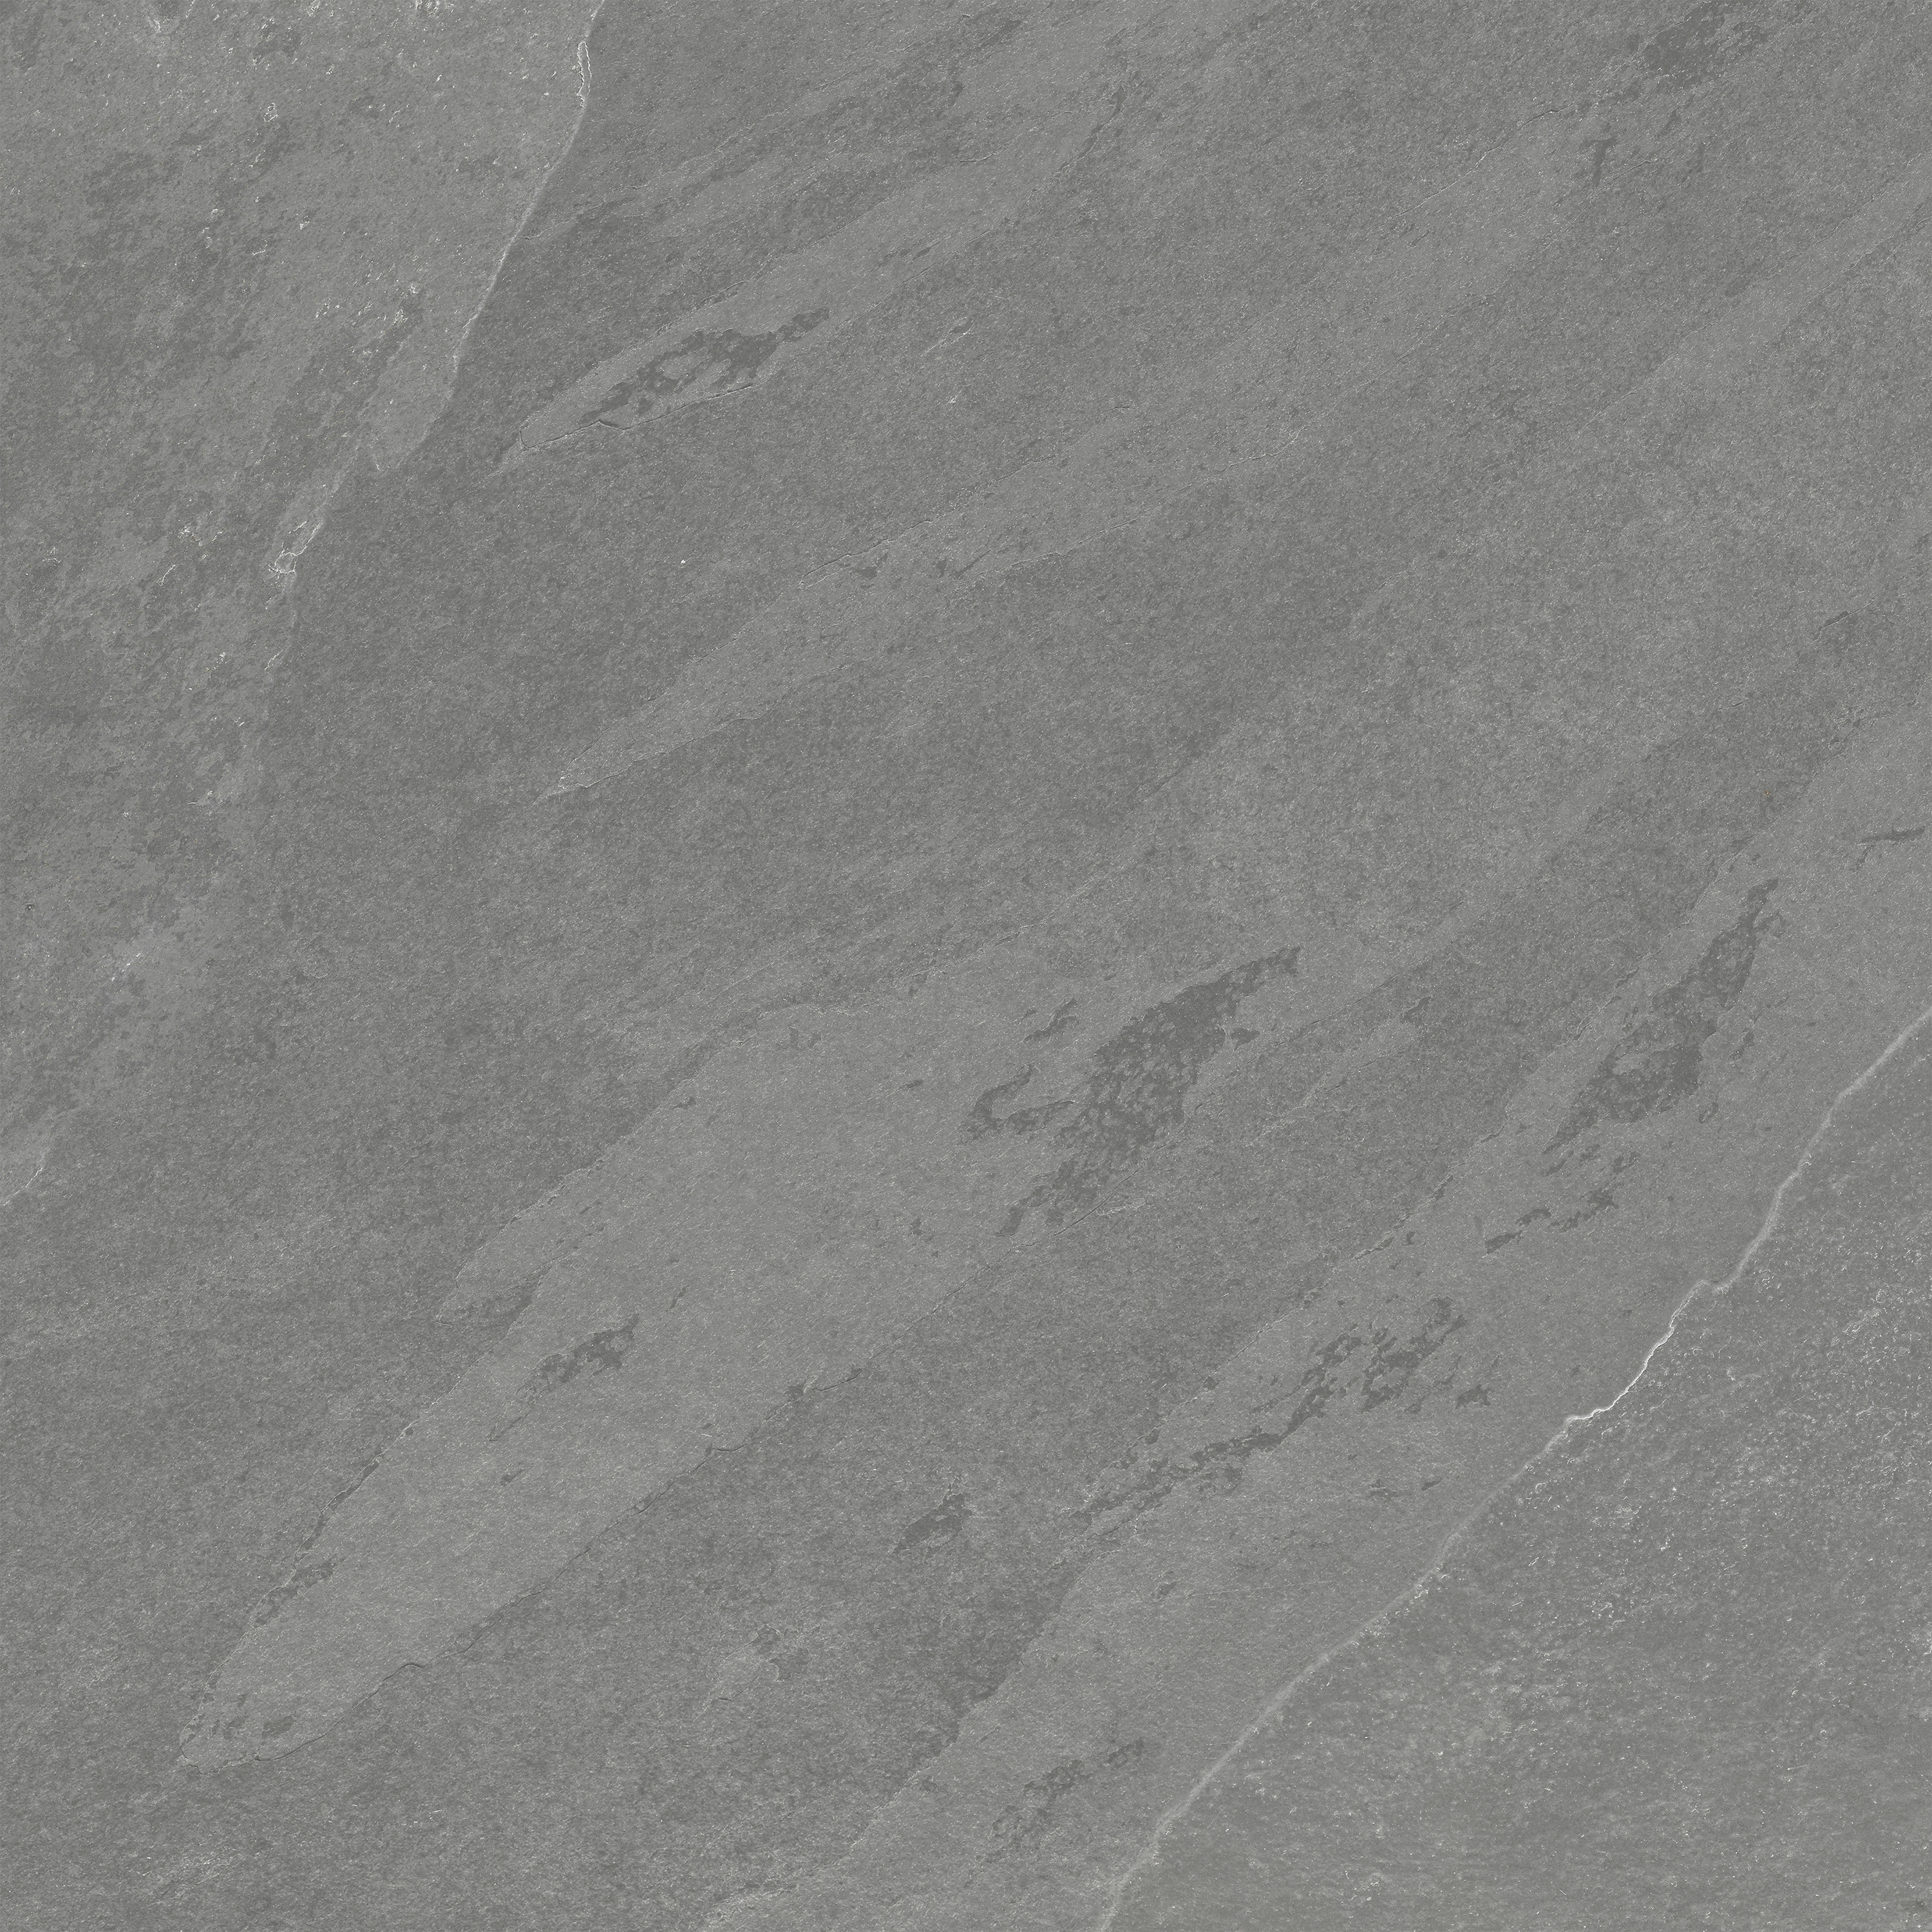 chromium pattern color body porcelain field tile from nord anatolia collection distributed by surface group international matte finish rectified edge 24x24 square shape